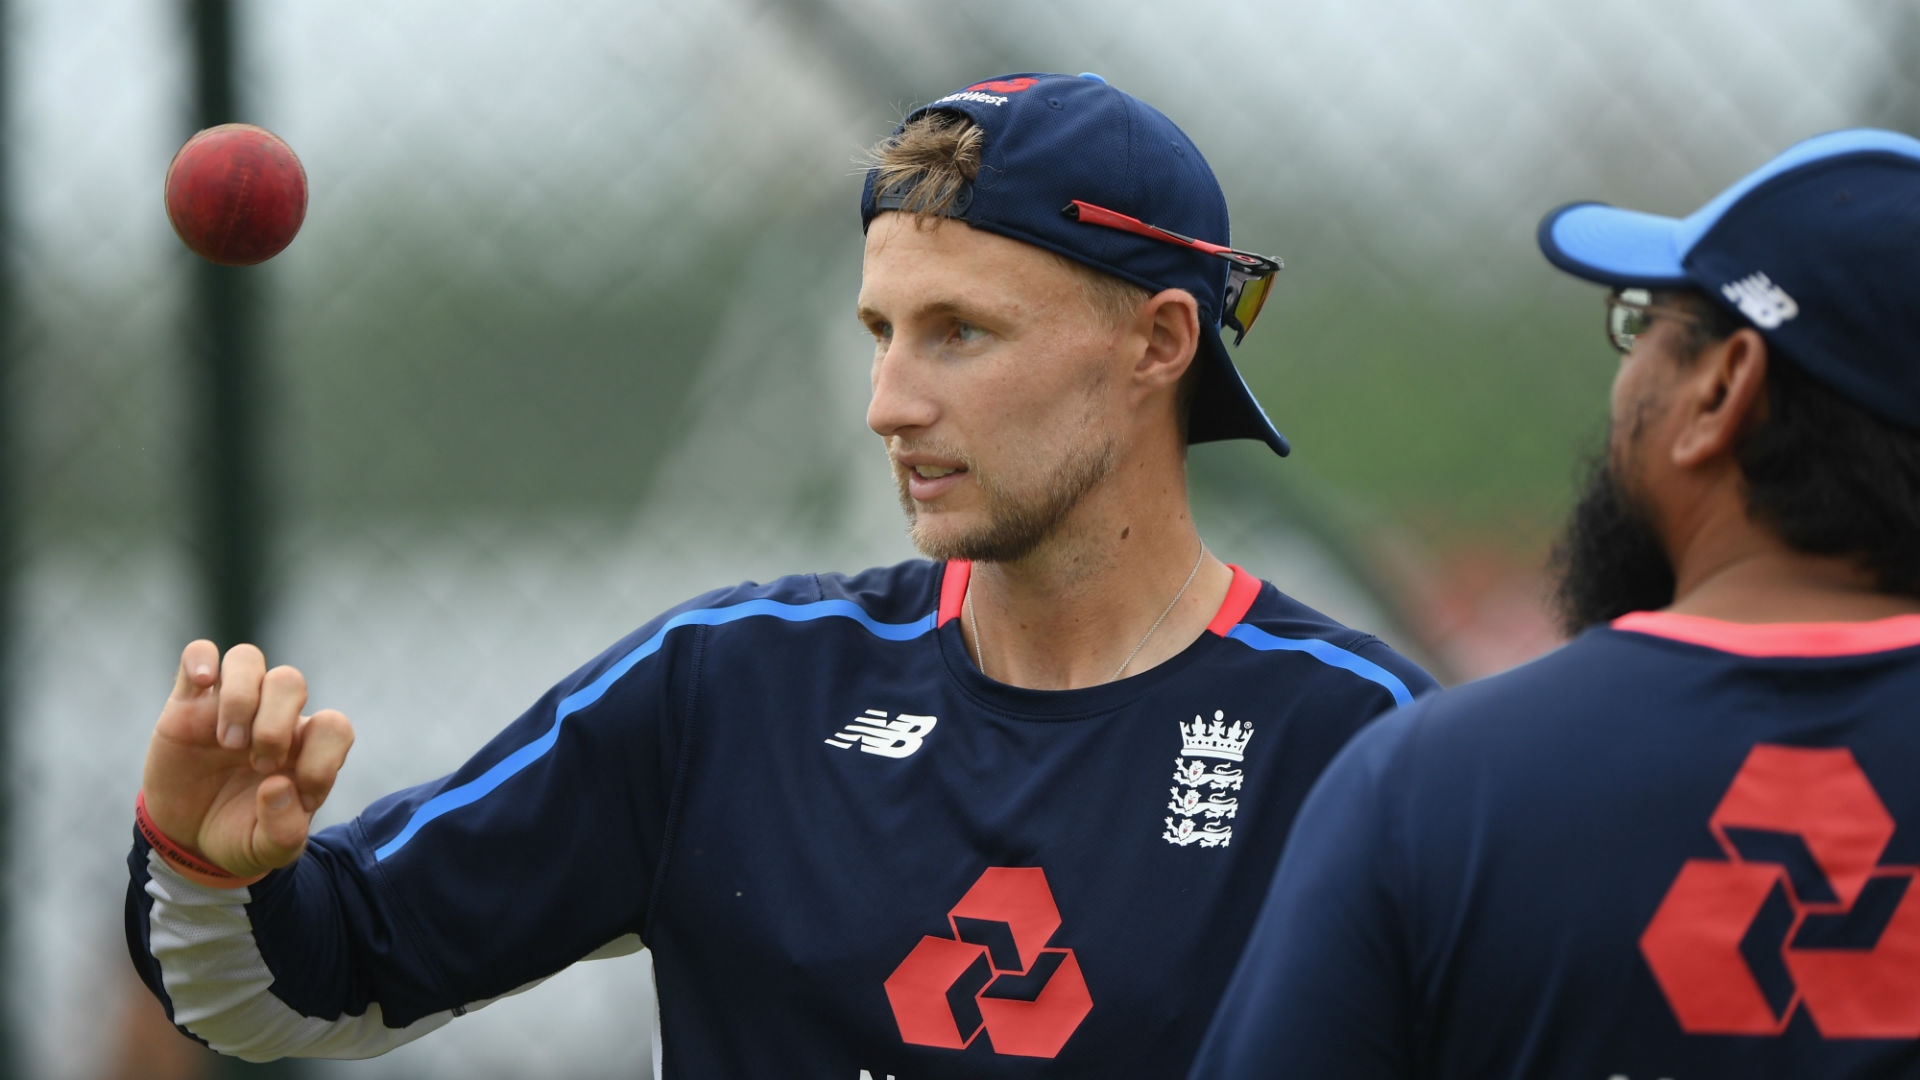 Joe Root had no hesitation in signing a three-year extension with Yorkshire, stating: "I don't really see myself playing anywhere else."